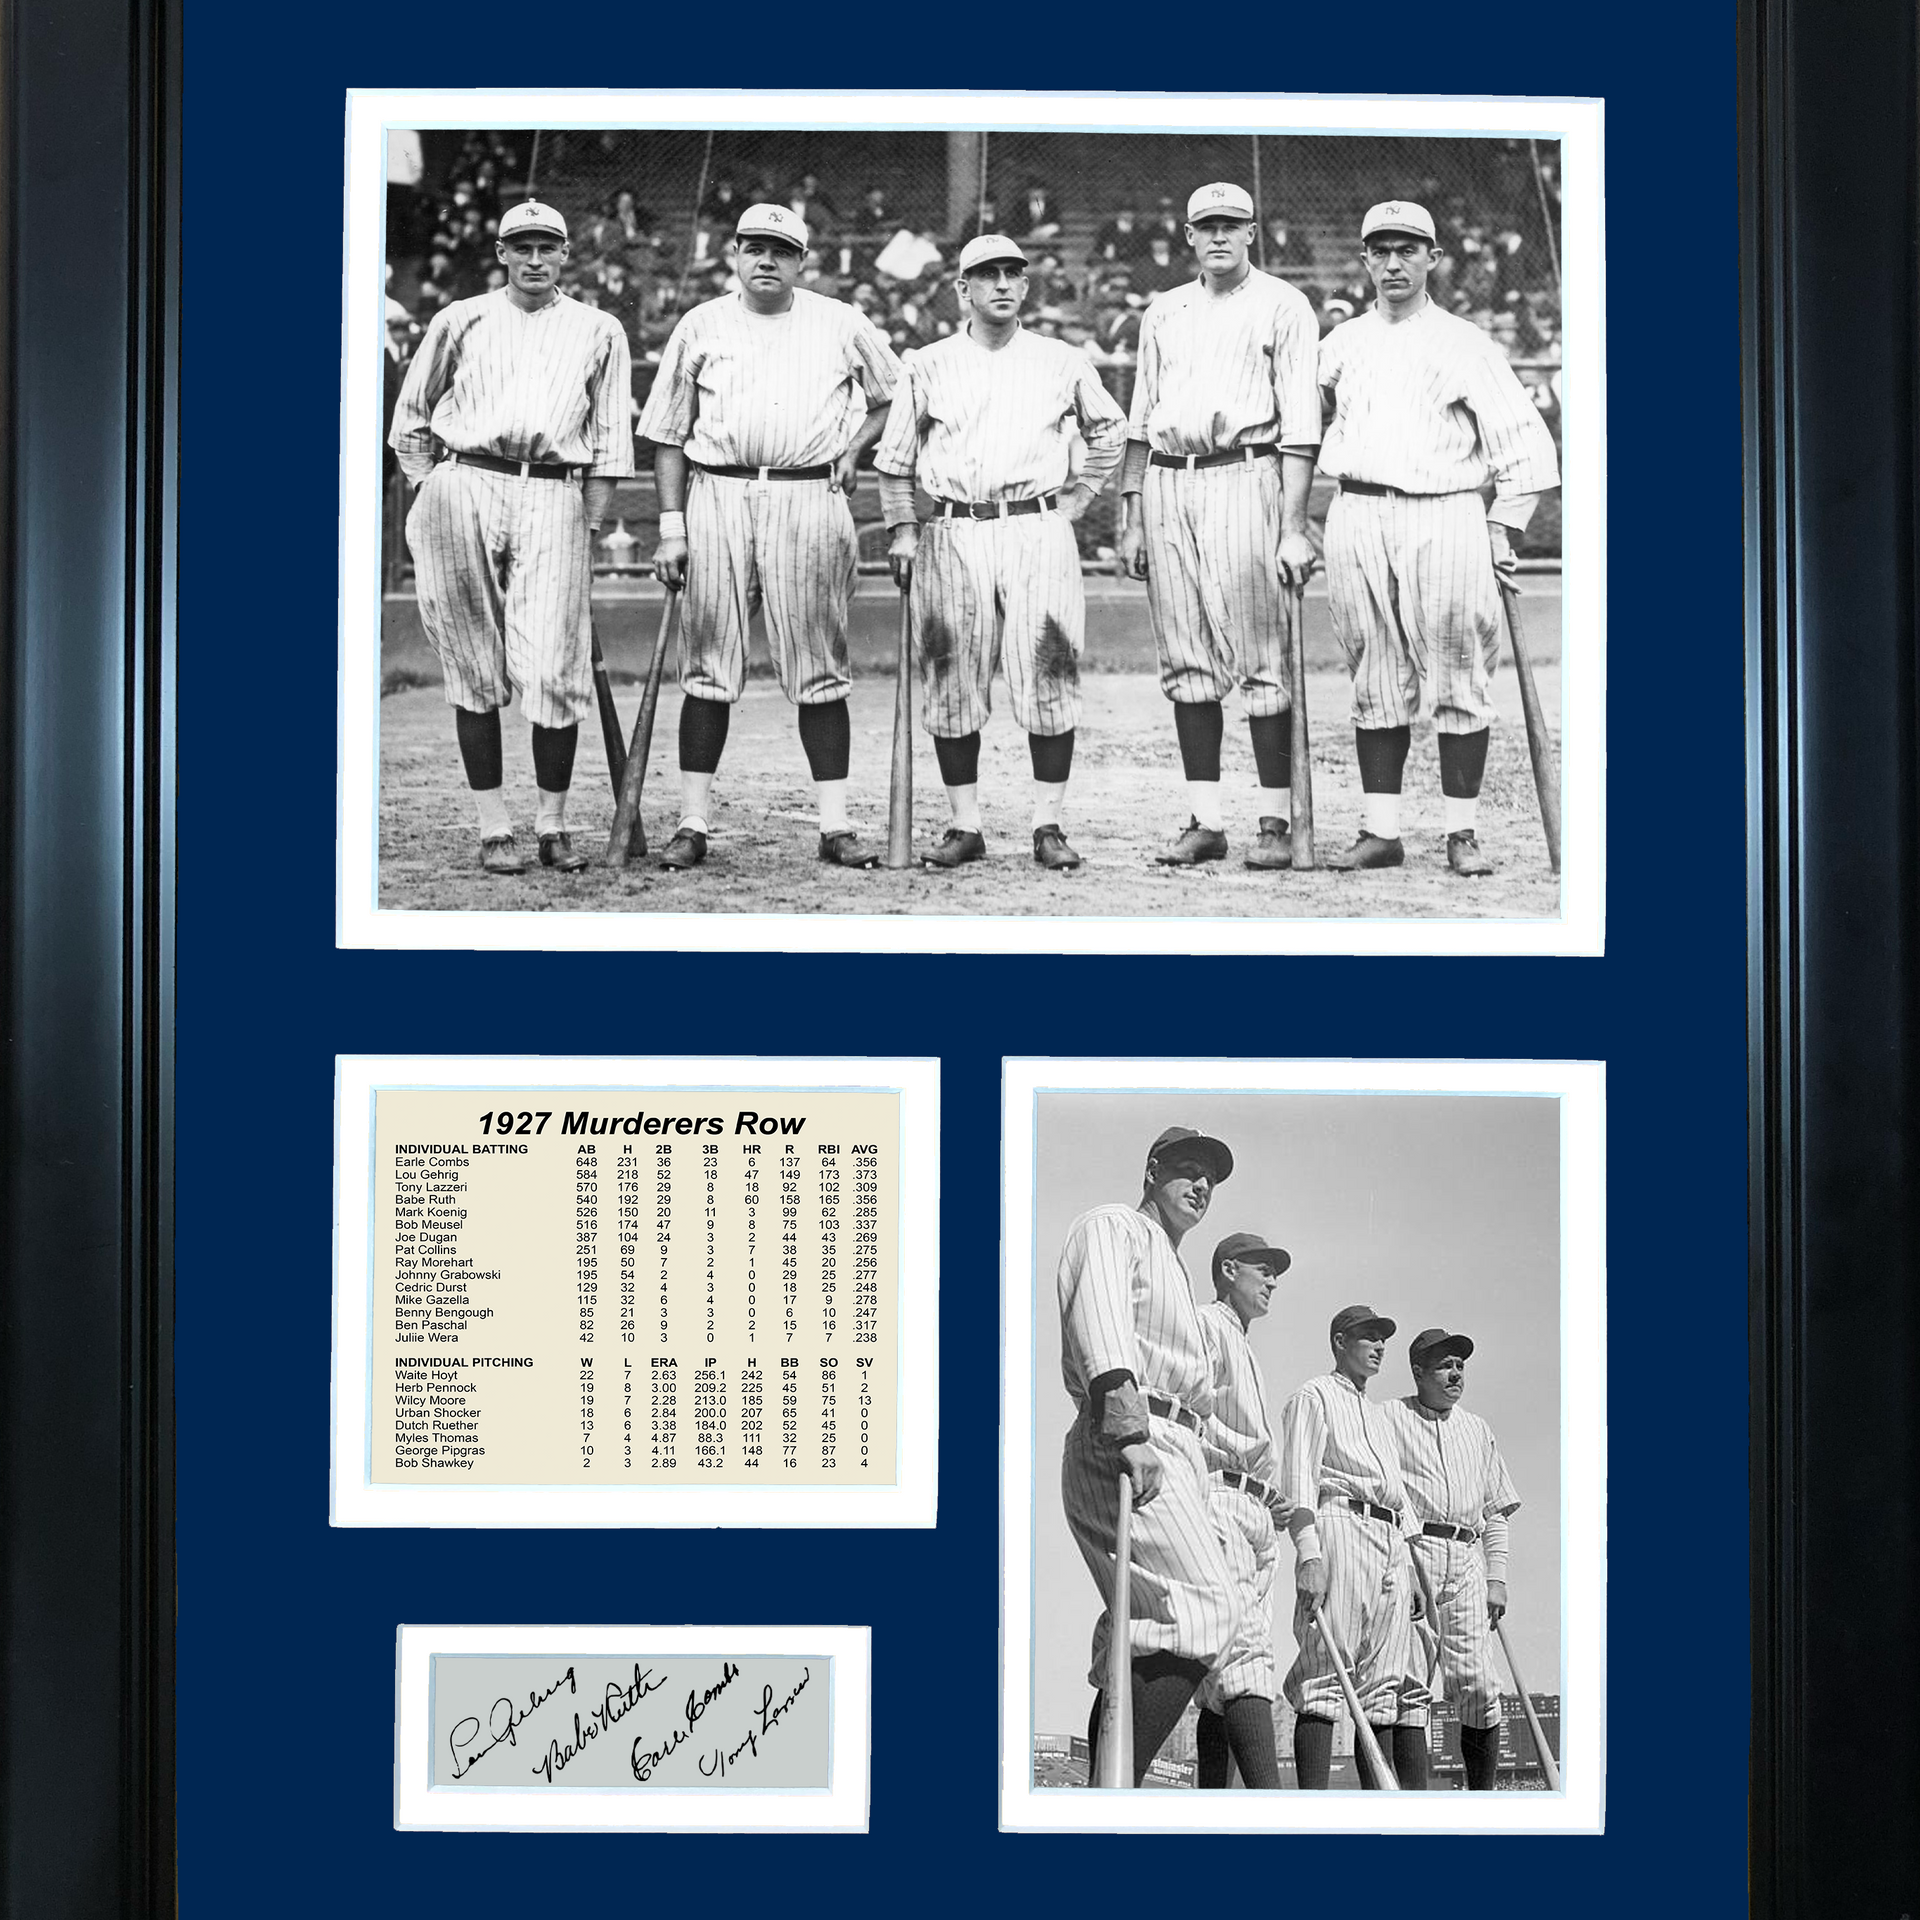  New York Yankees 1927 Murderer's Row Lineup Collectible, Framed Photo Collage Wall Art Decor - 12x15